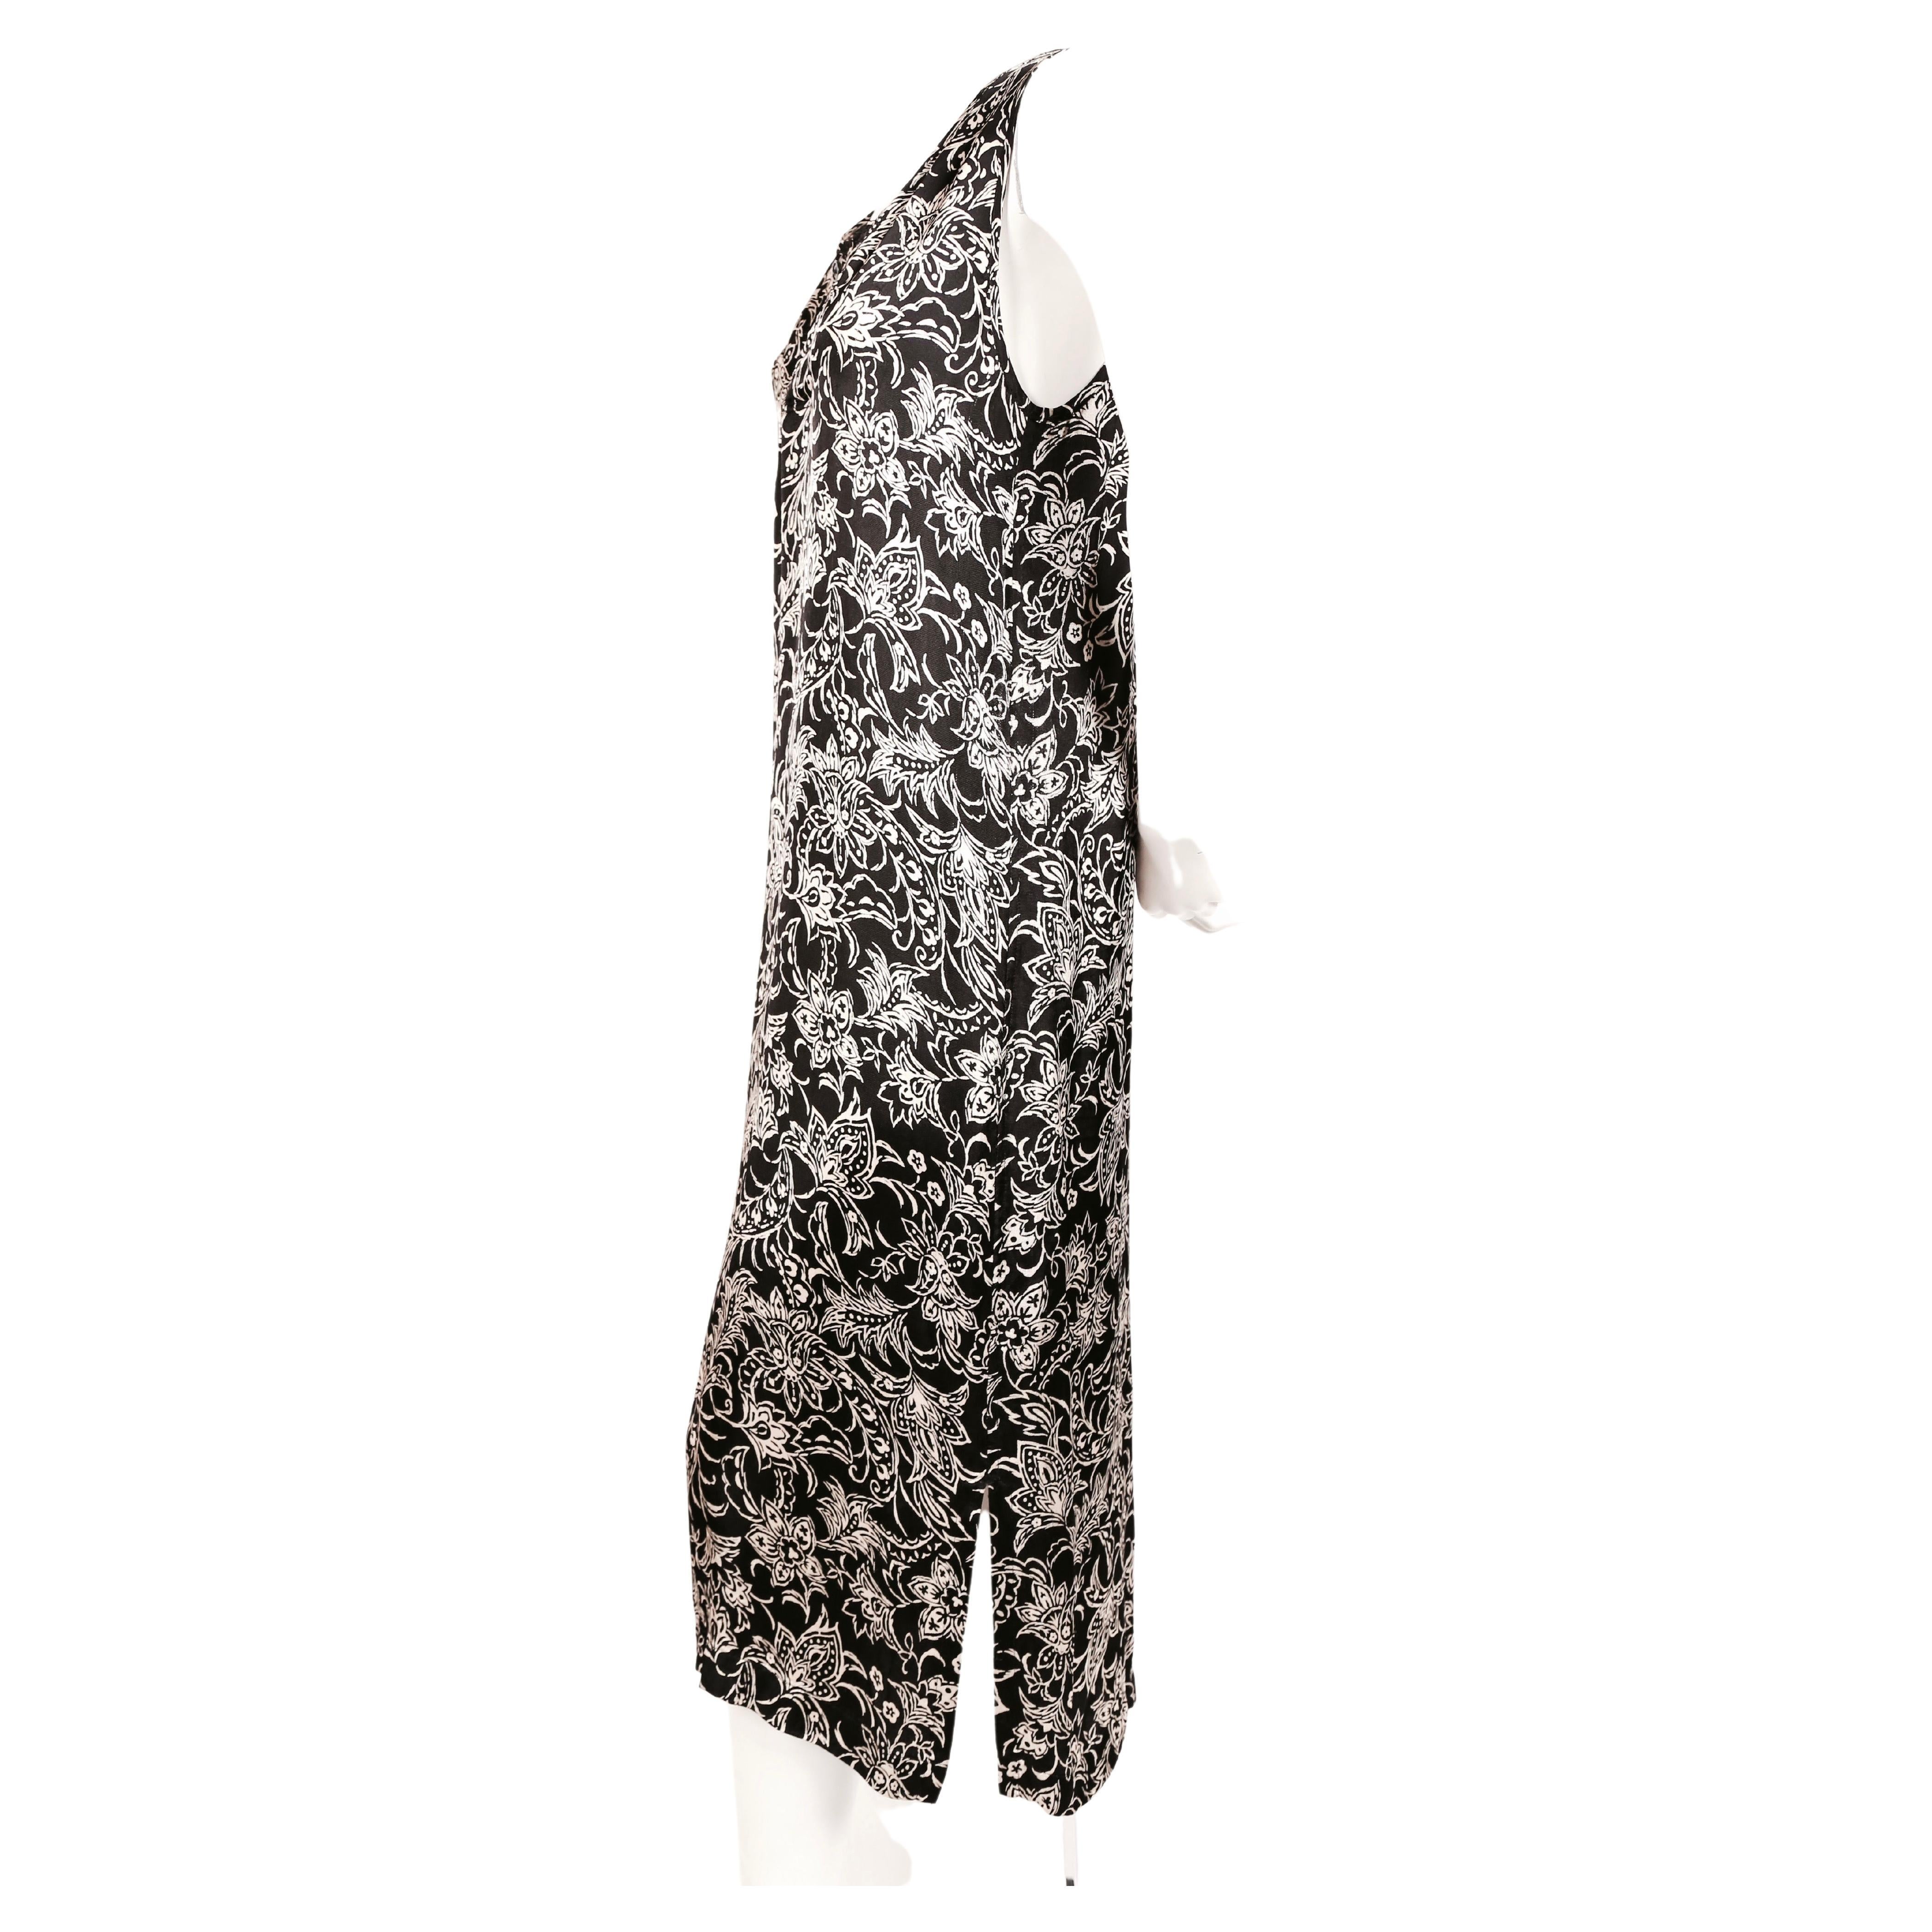 Black and off white abstract printed dress with dual slits and button neckline designed by Rei Kawakubo for Comme Des Garcons robe de chambre. Best fits a size S. Approximate measurements: bust 36